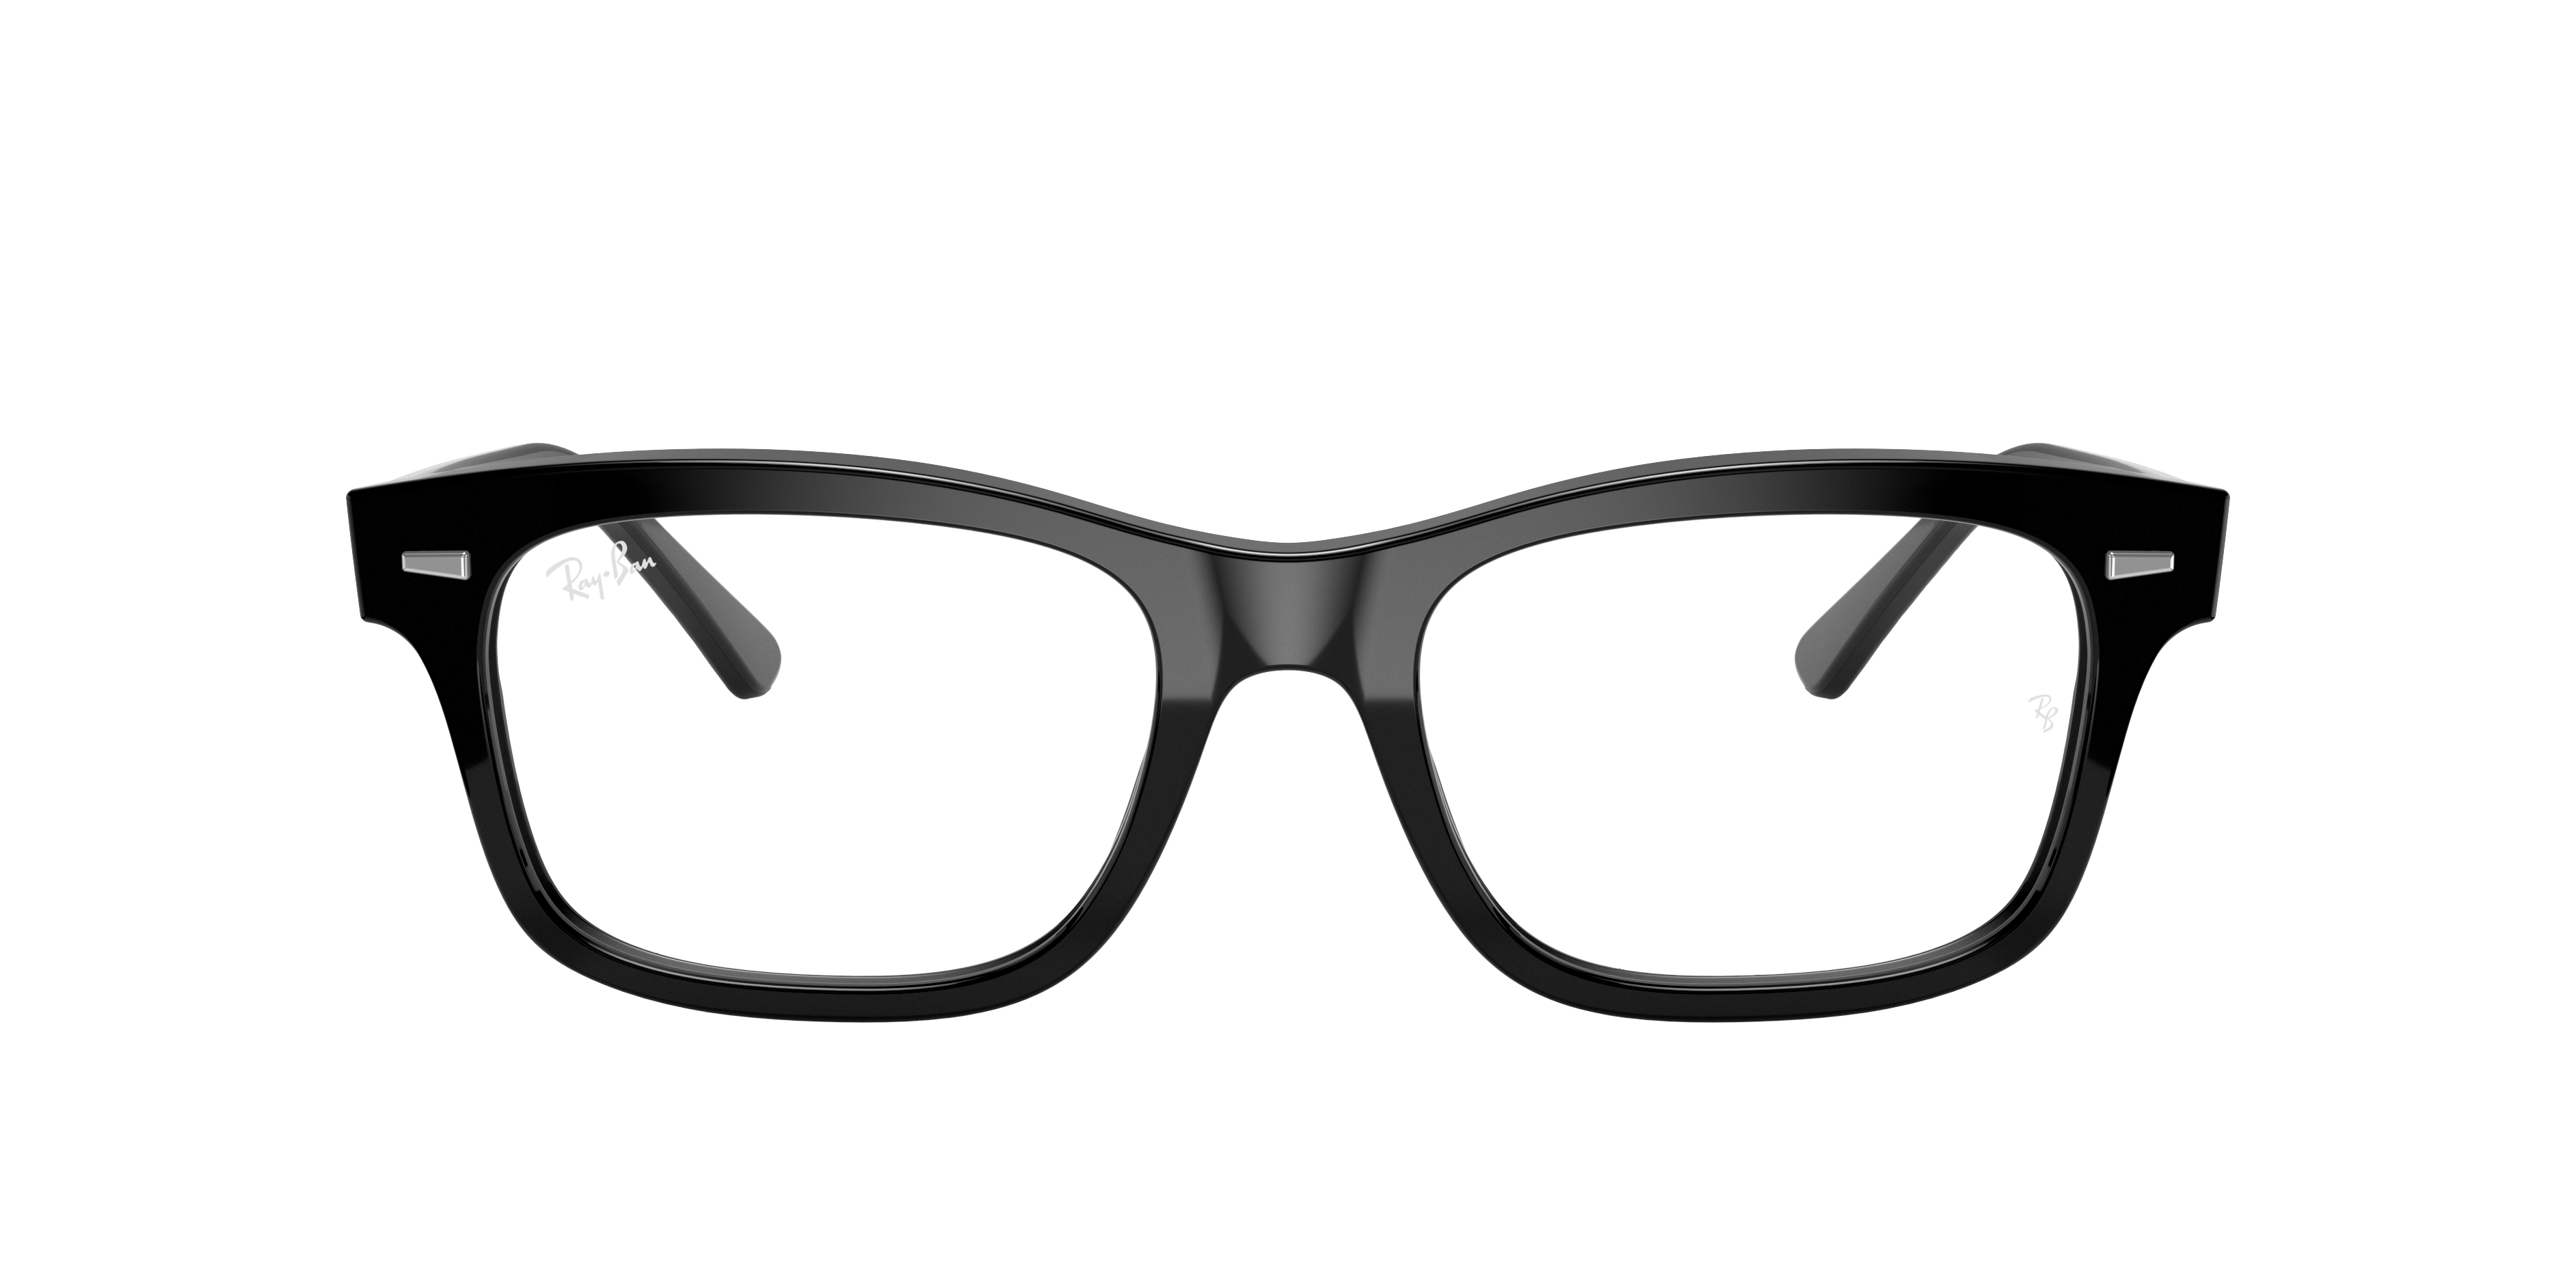 Ray-Ban 0RX5383 Glasses in Black | Target Optical